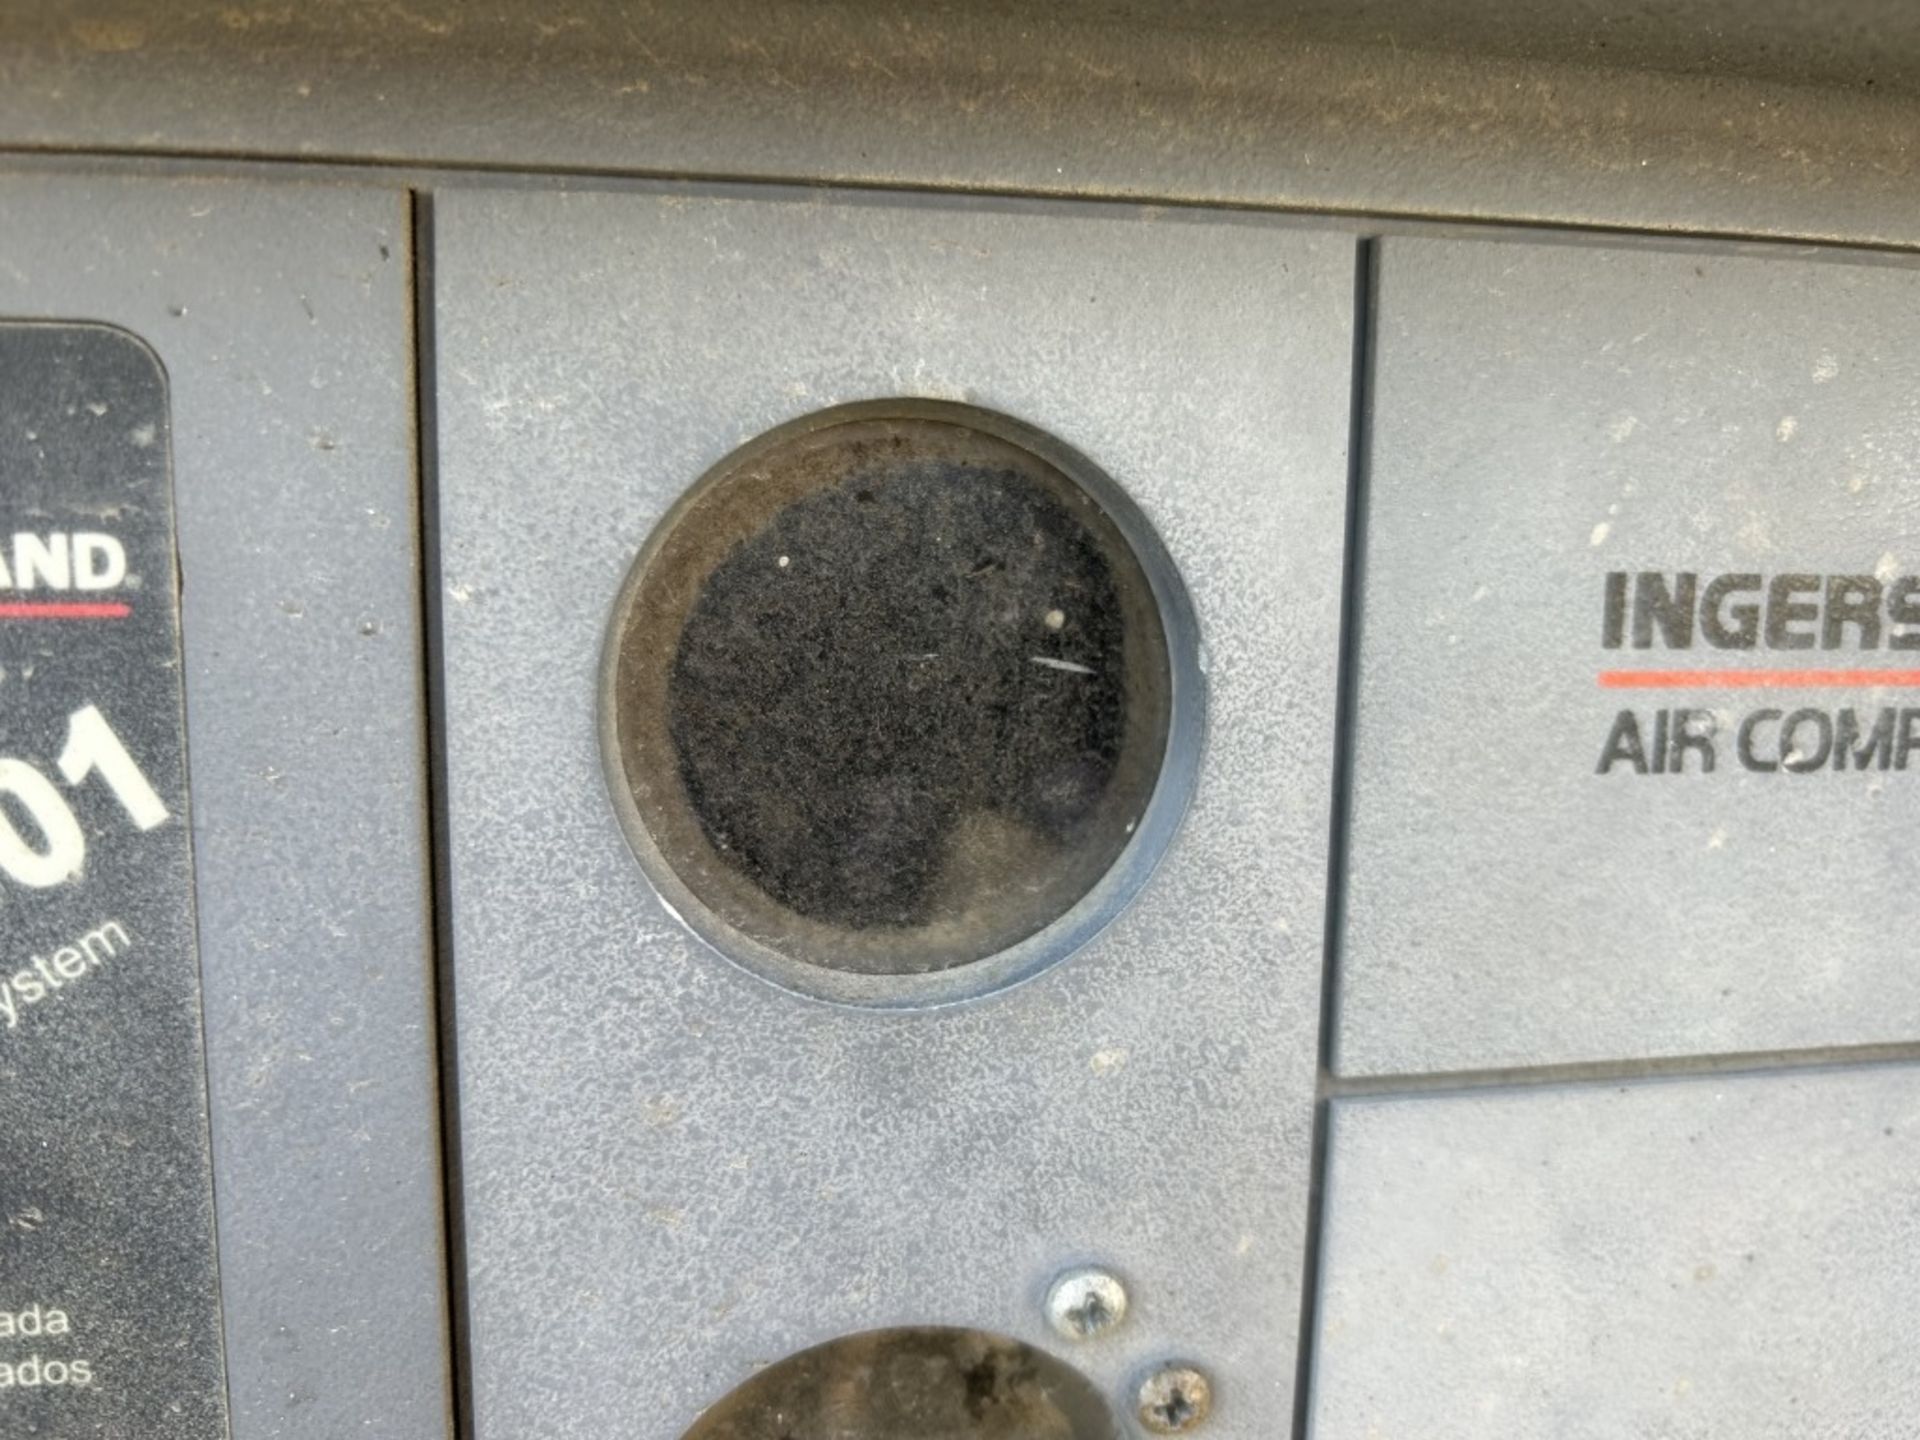 1999 Ingersoll-Rand 185 Towable Air Compressor - Image 28 of 29